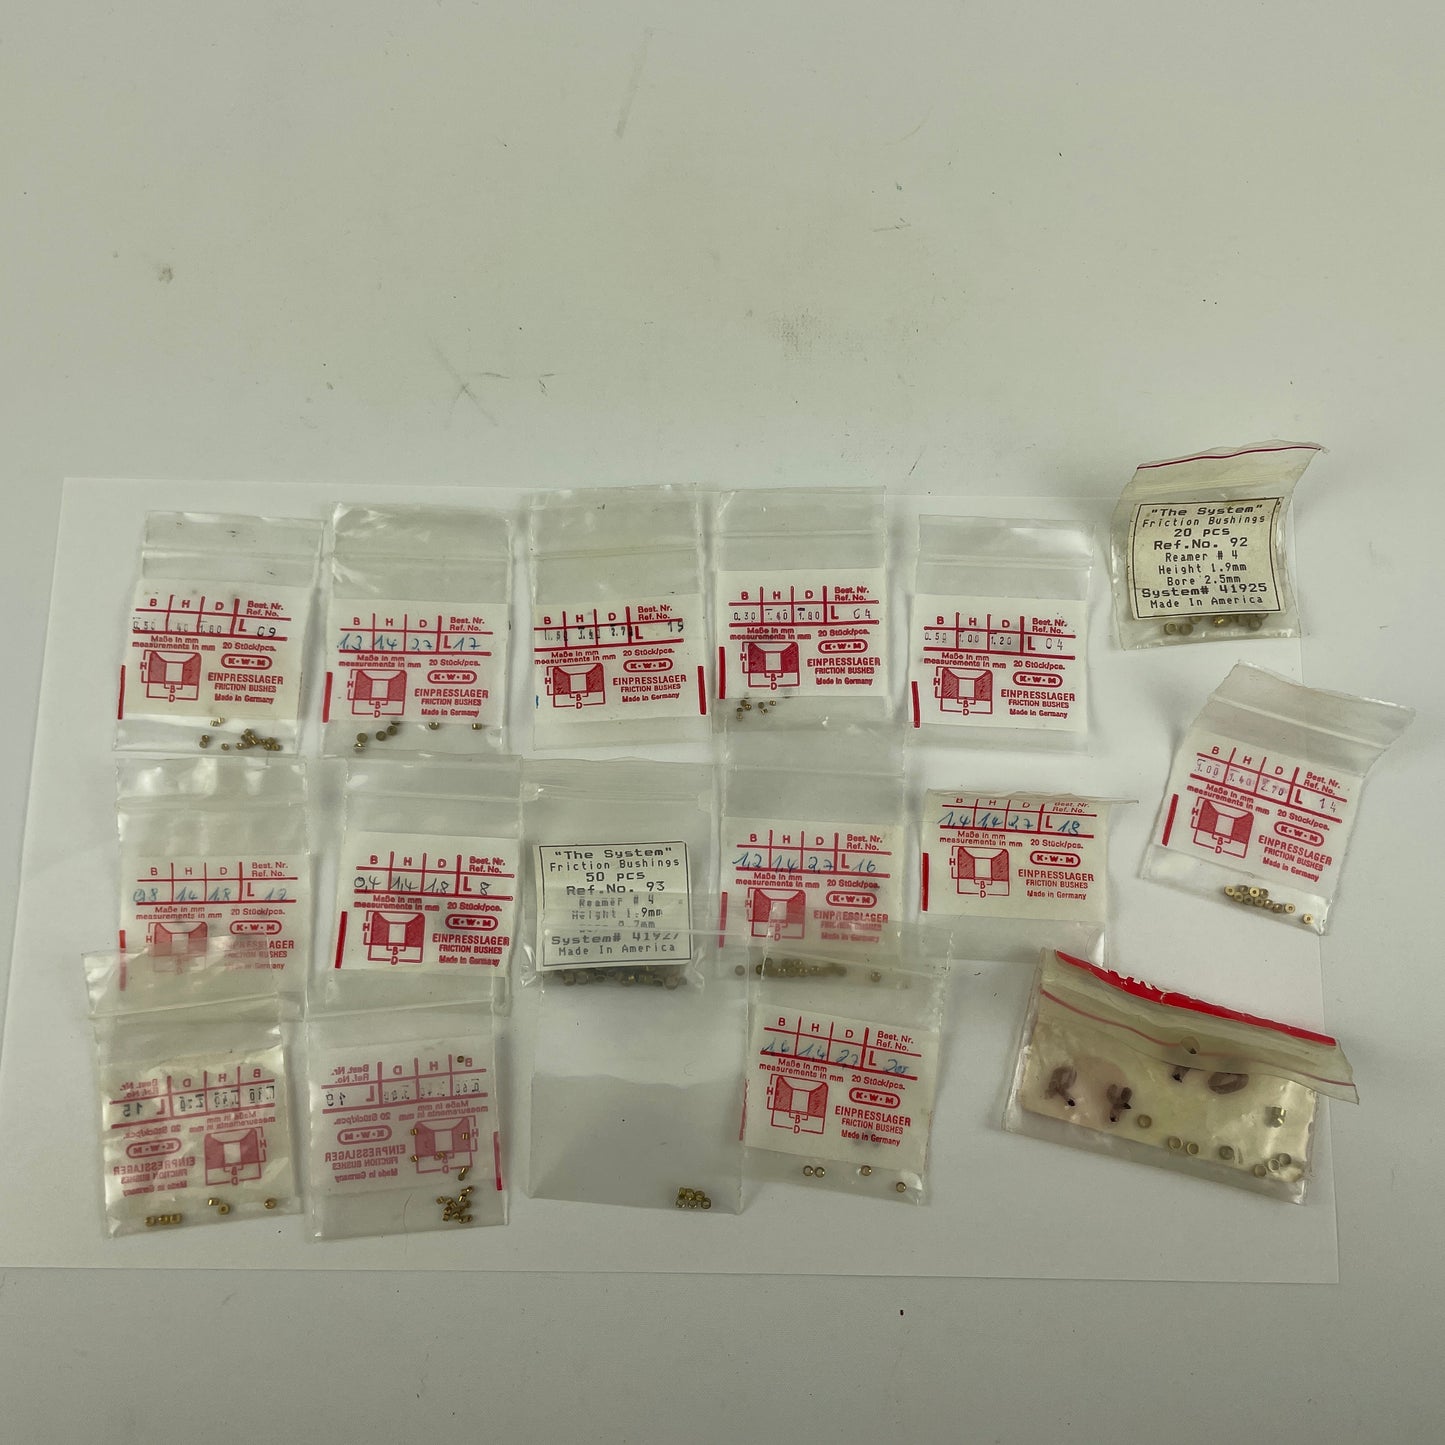 Jan Lot 37- KWM Assortment of 15 Packages of Brass Bushings